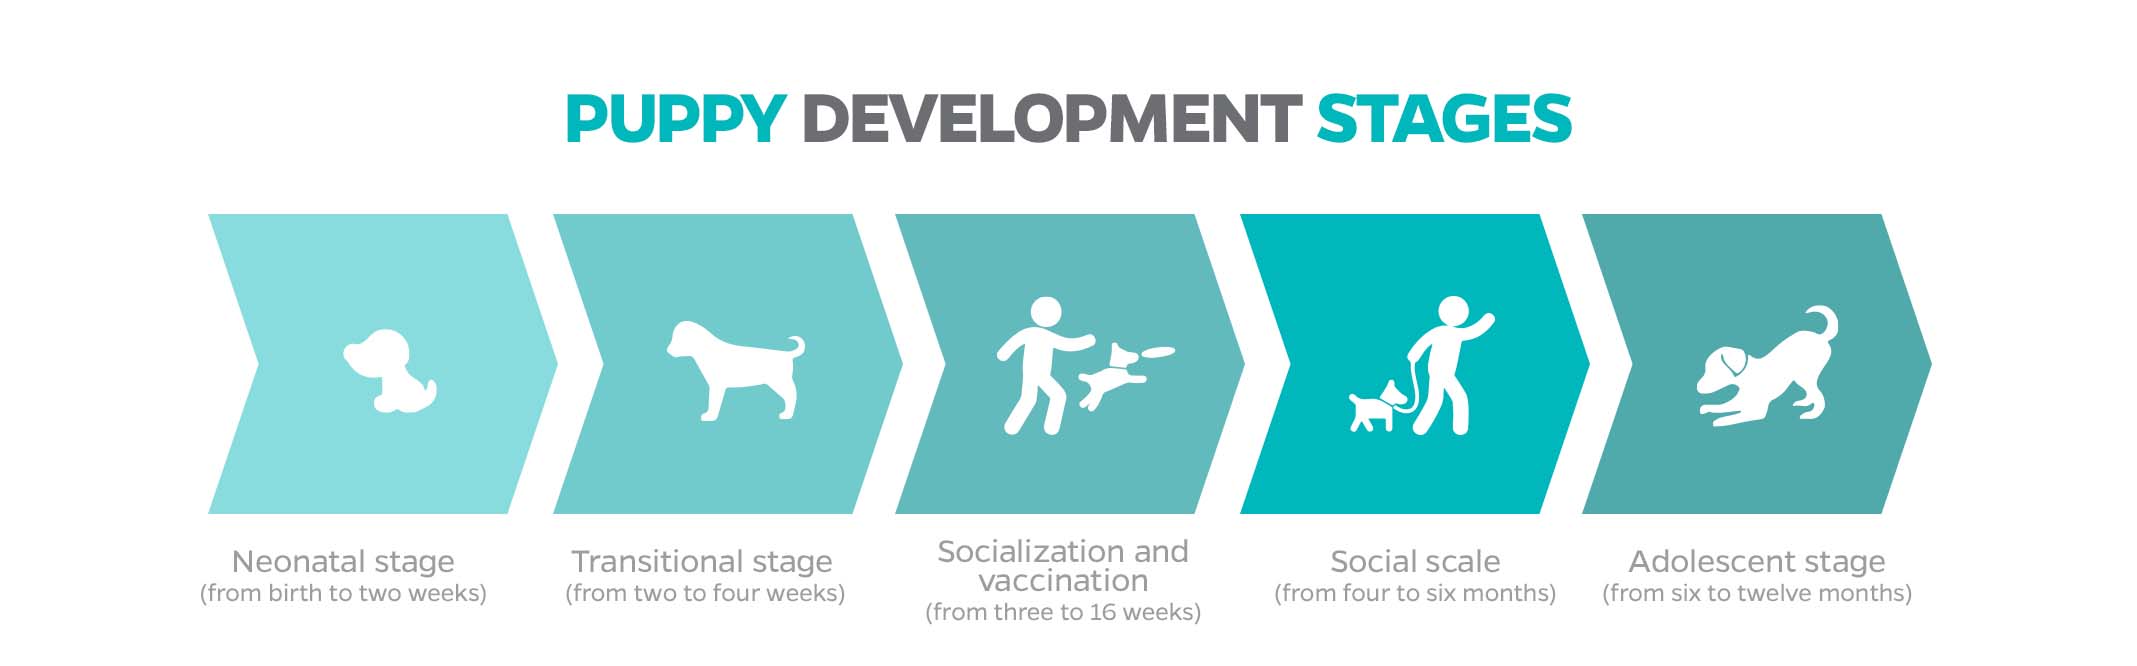 puppy development stages for first time dog owners